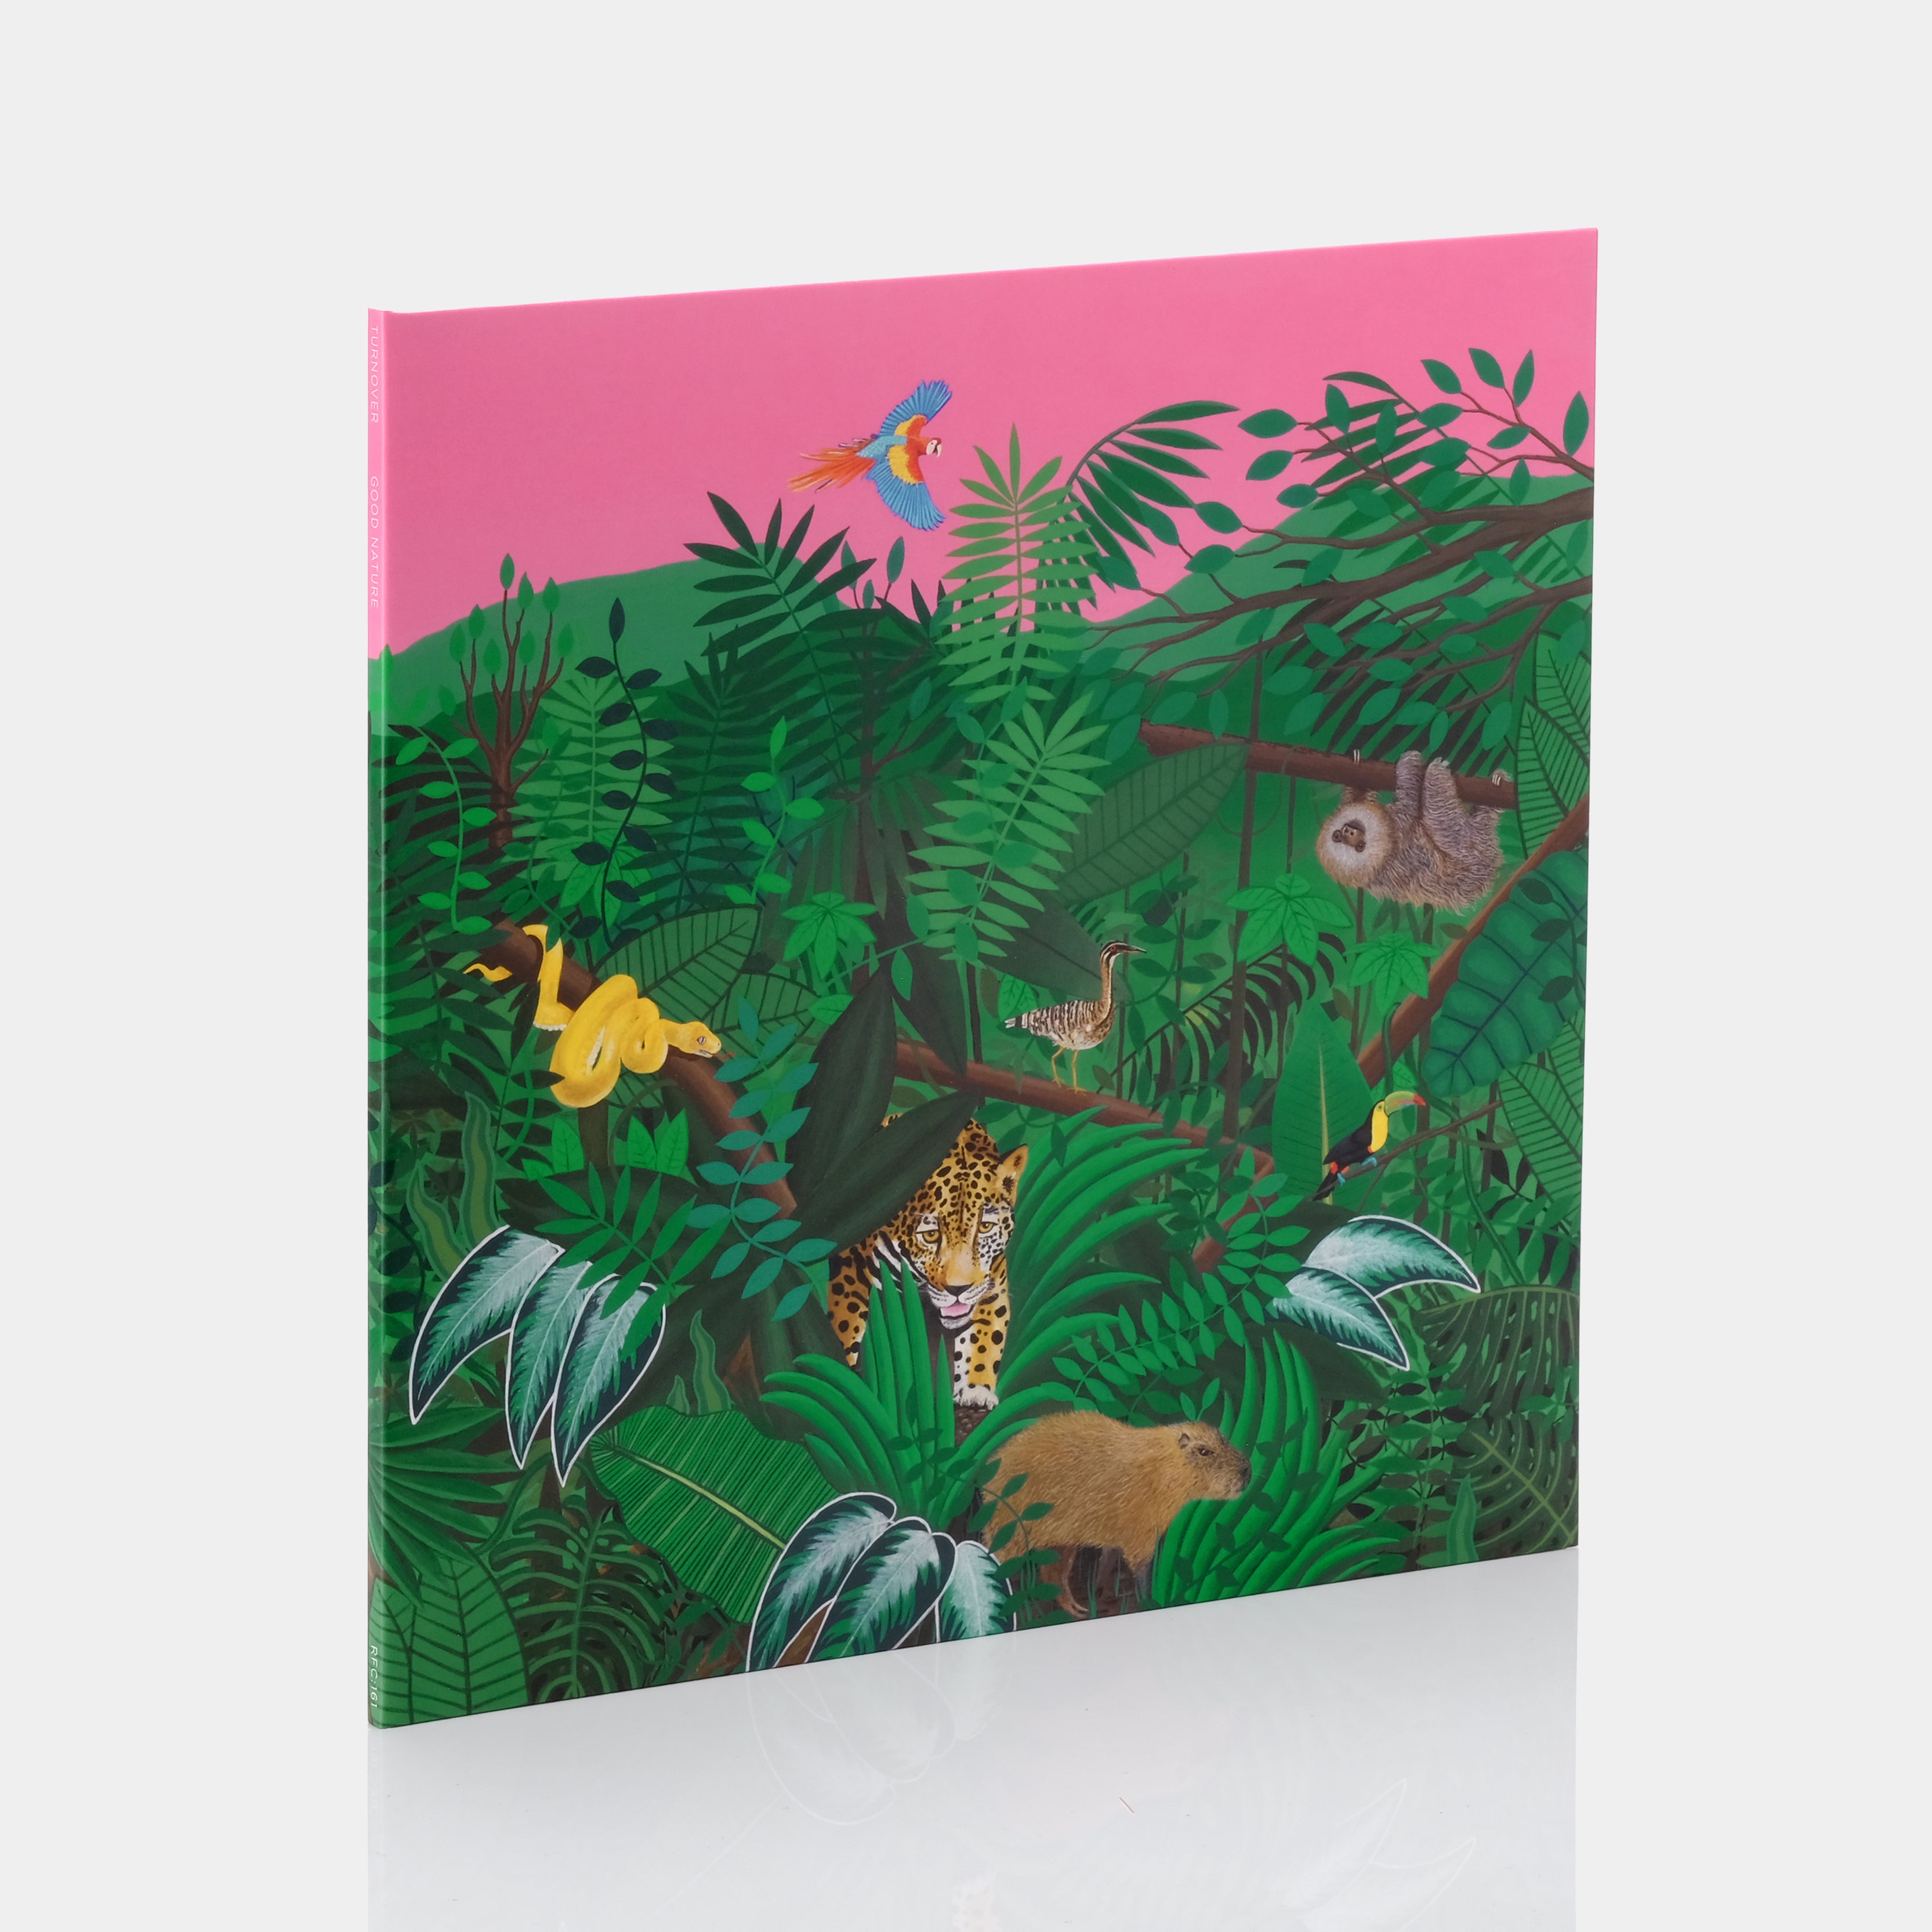 Turnover - Good Nature LP Clear & Pink Swirl Vinyl Record